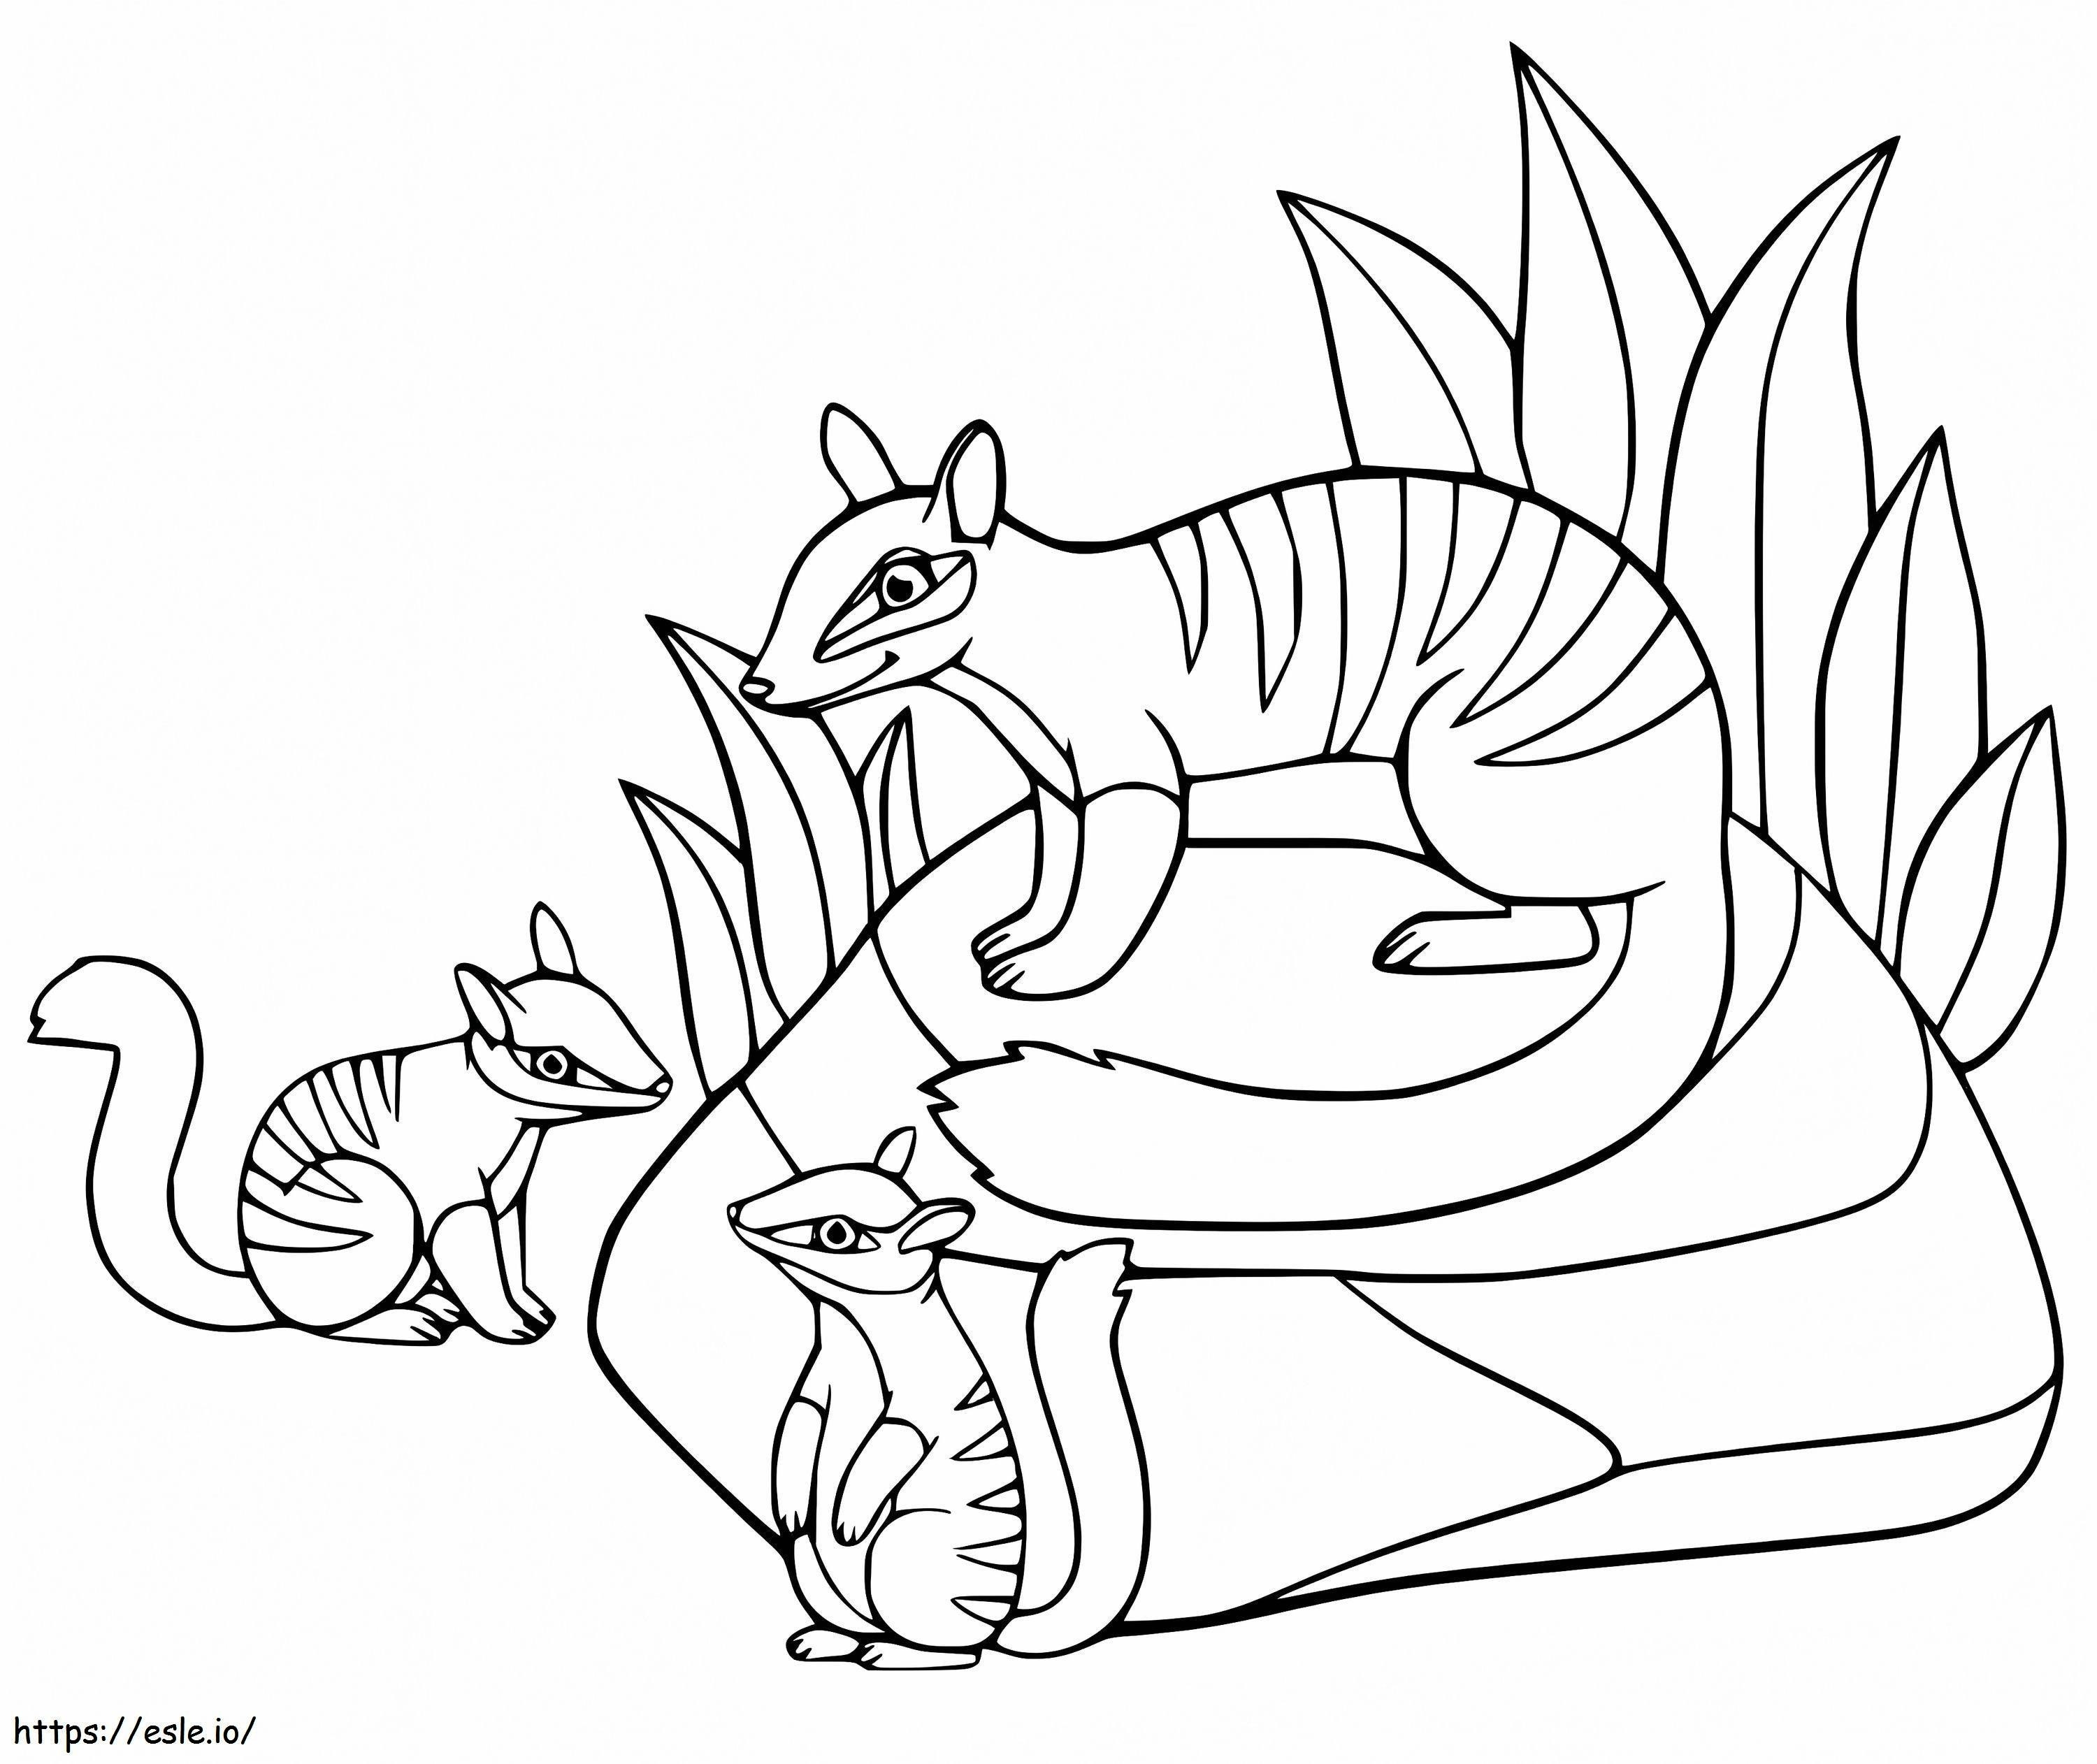 Numbat Family coloring page